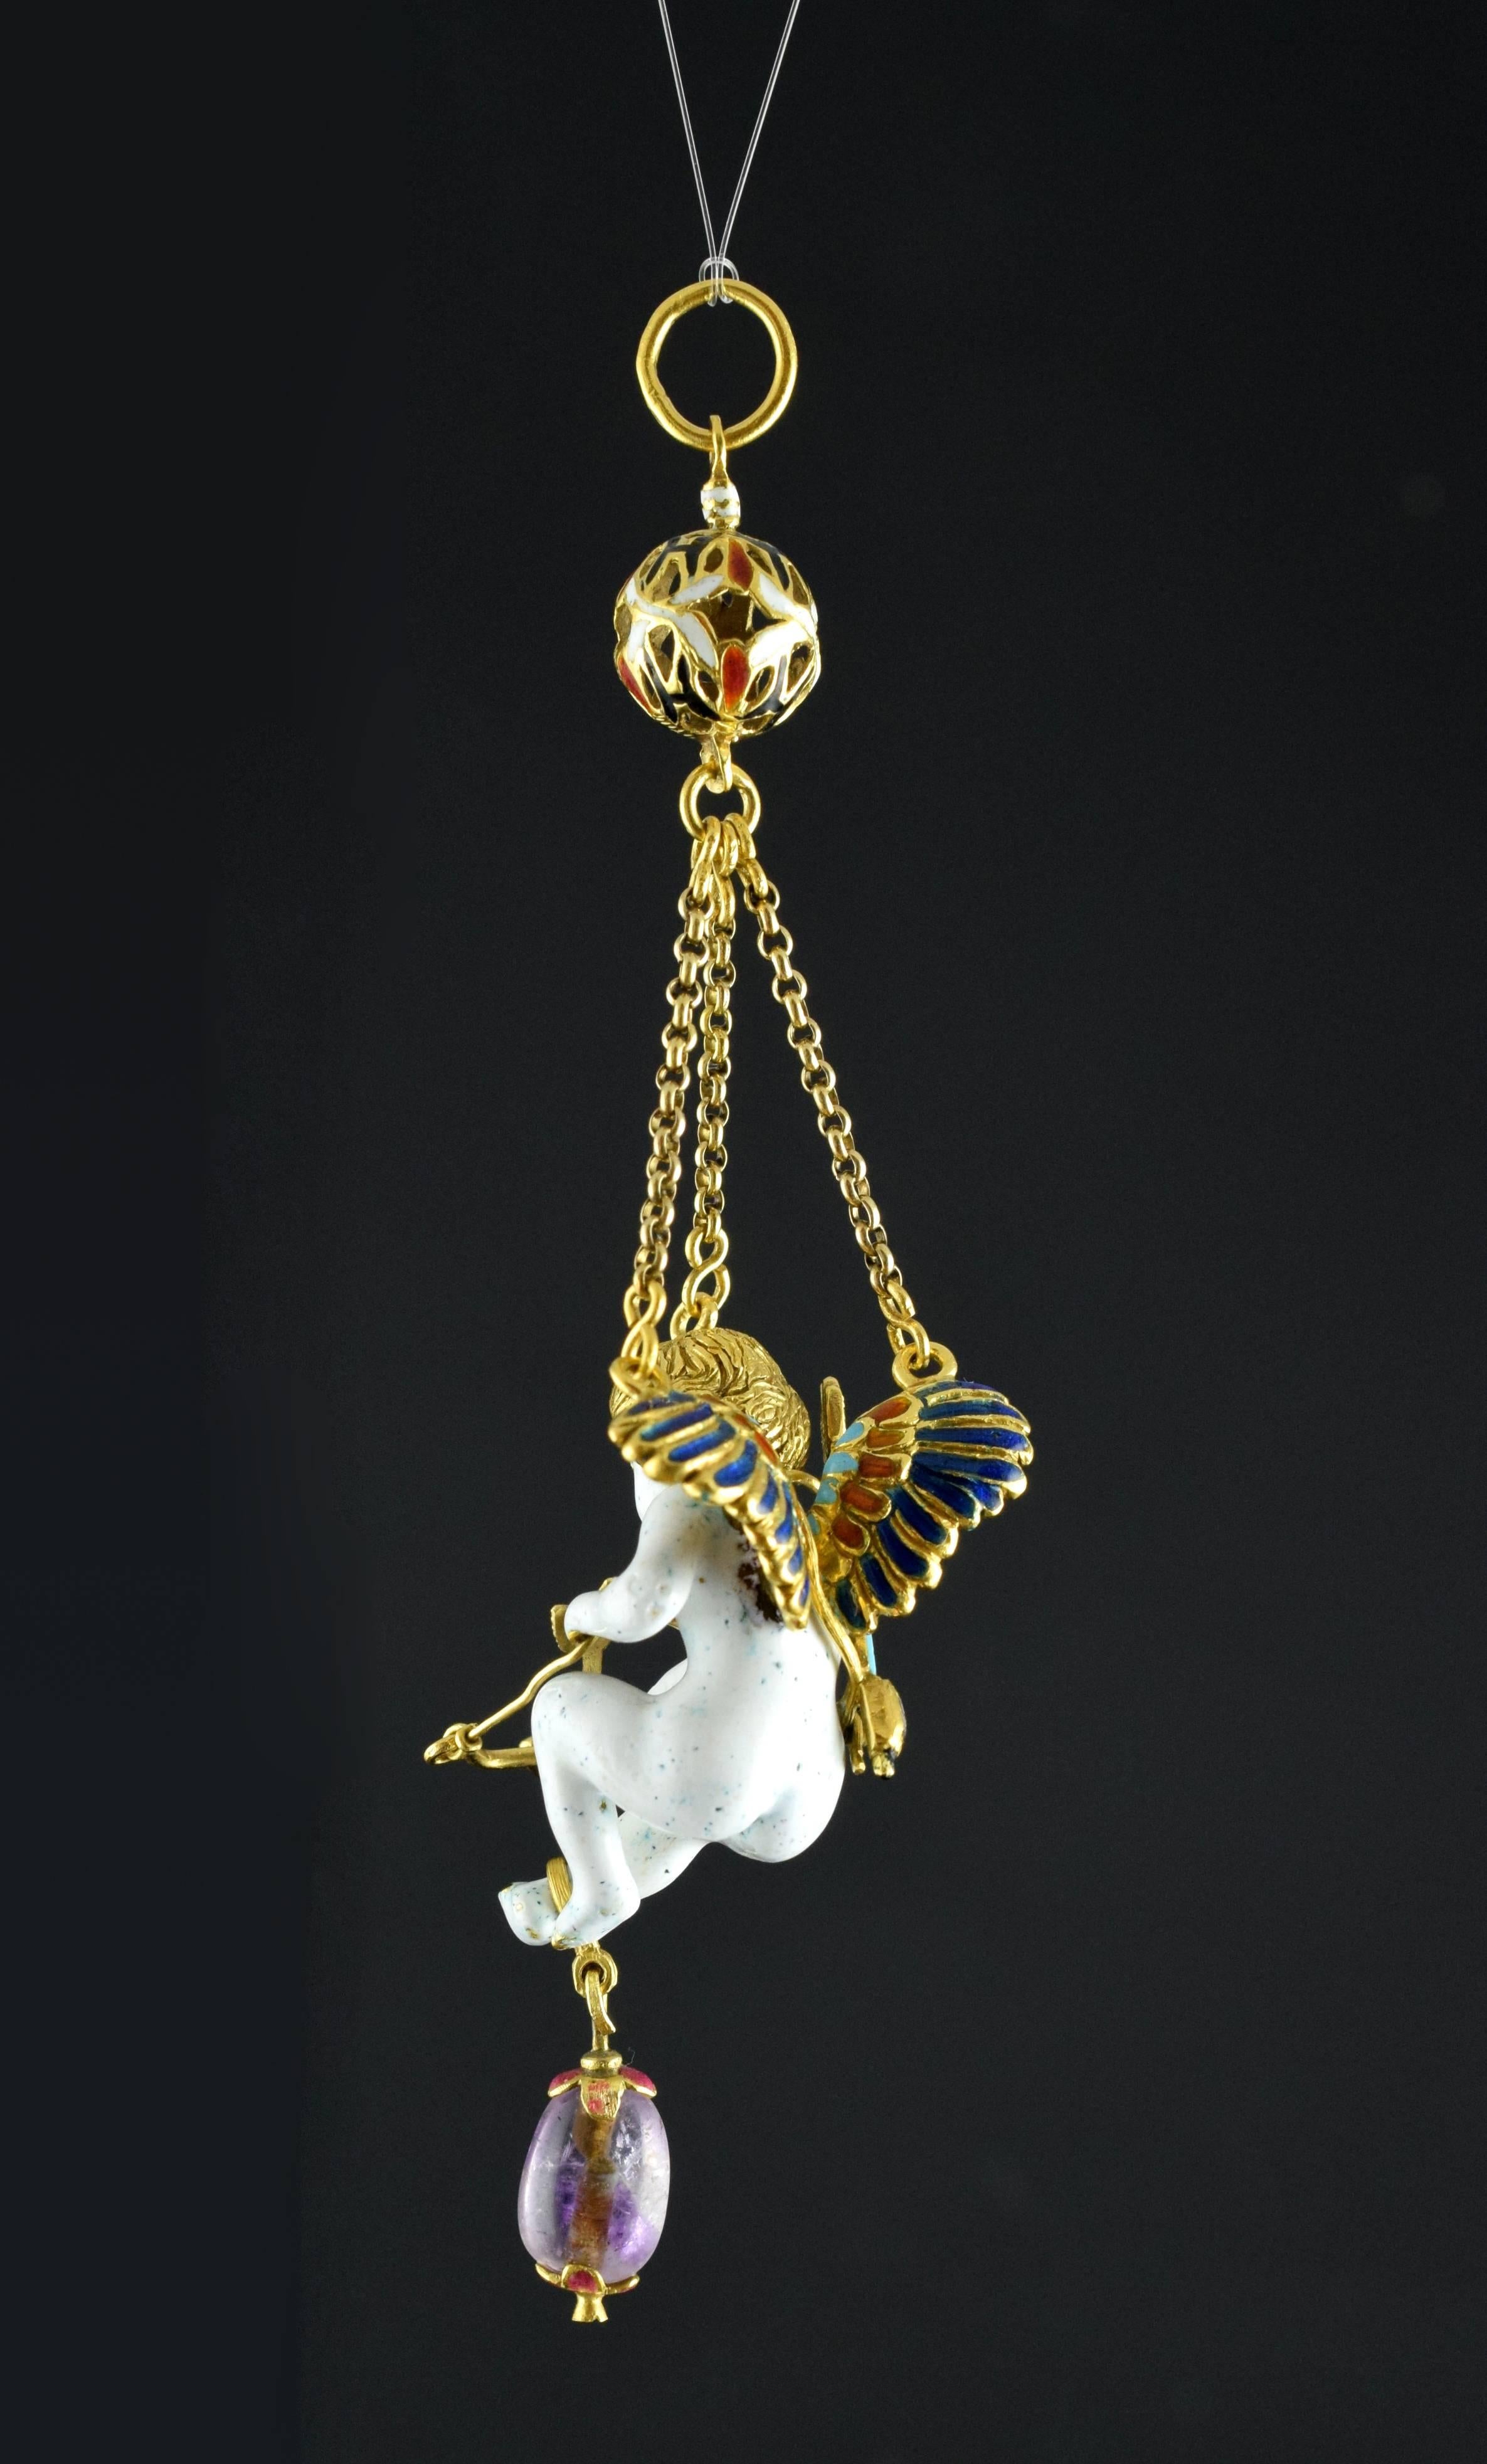 The white human figurine is suspended in the air thanks to three gold chains, which are joined in a perforated ball decorated with red, white and black enamels, from which arises the ring from which the pendant would be hung around the neck. The